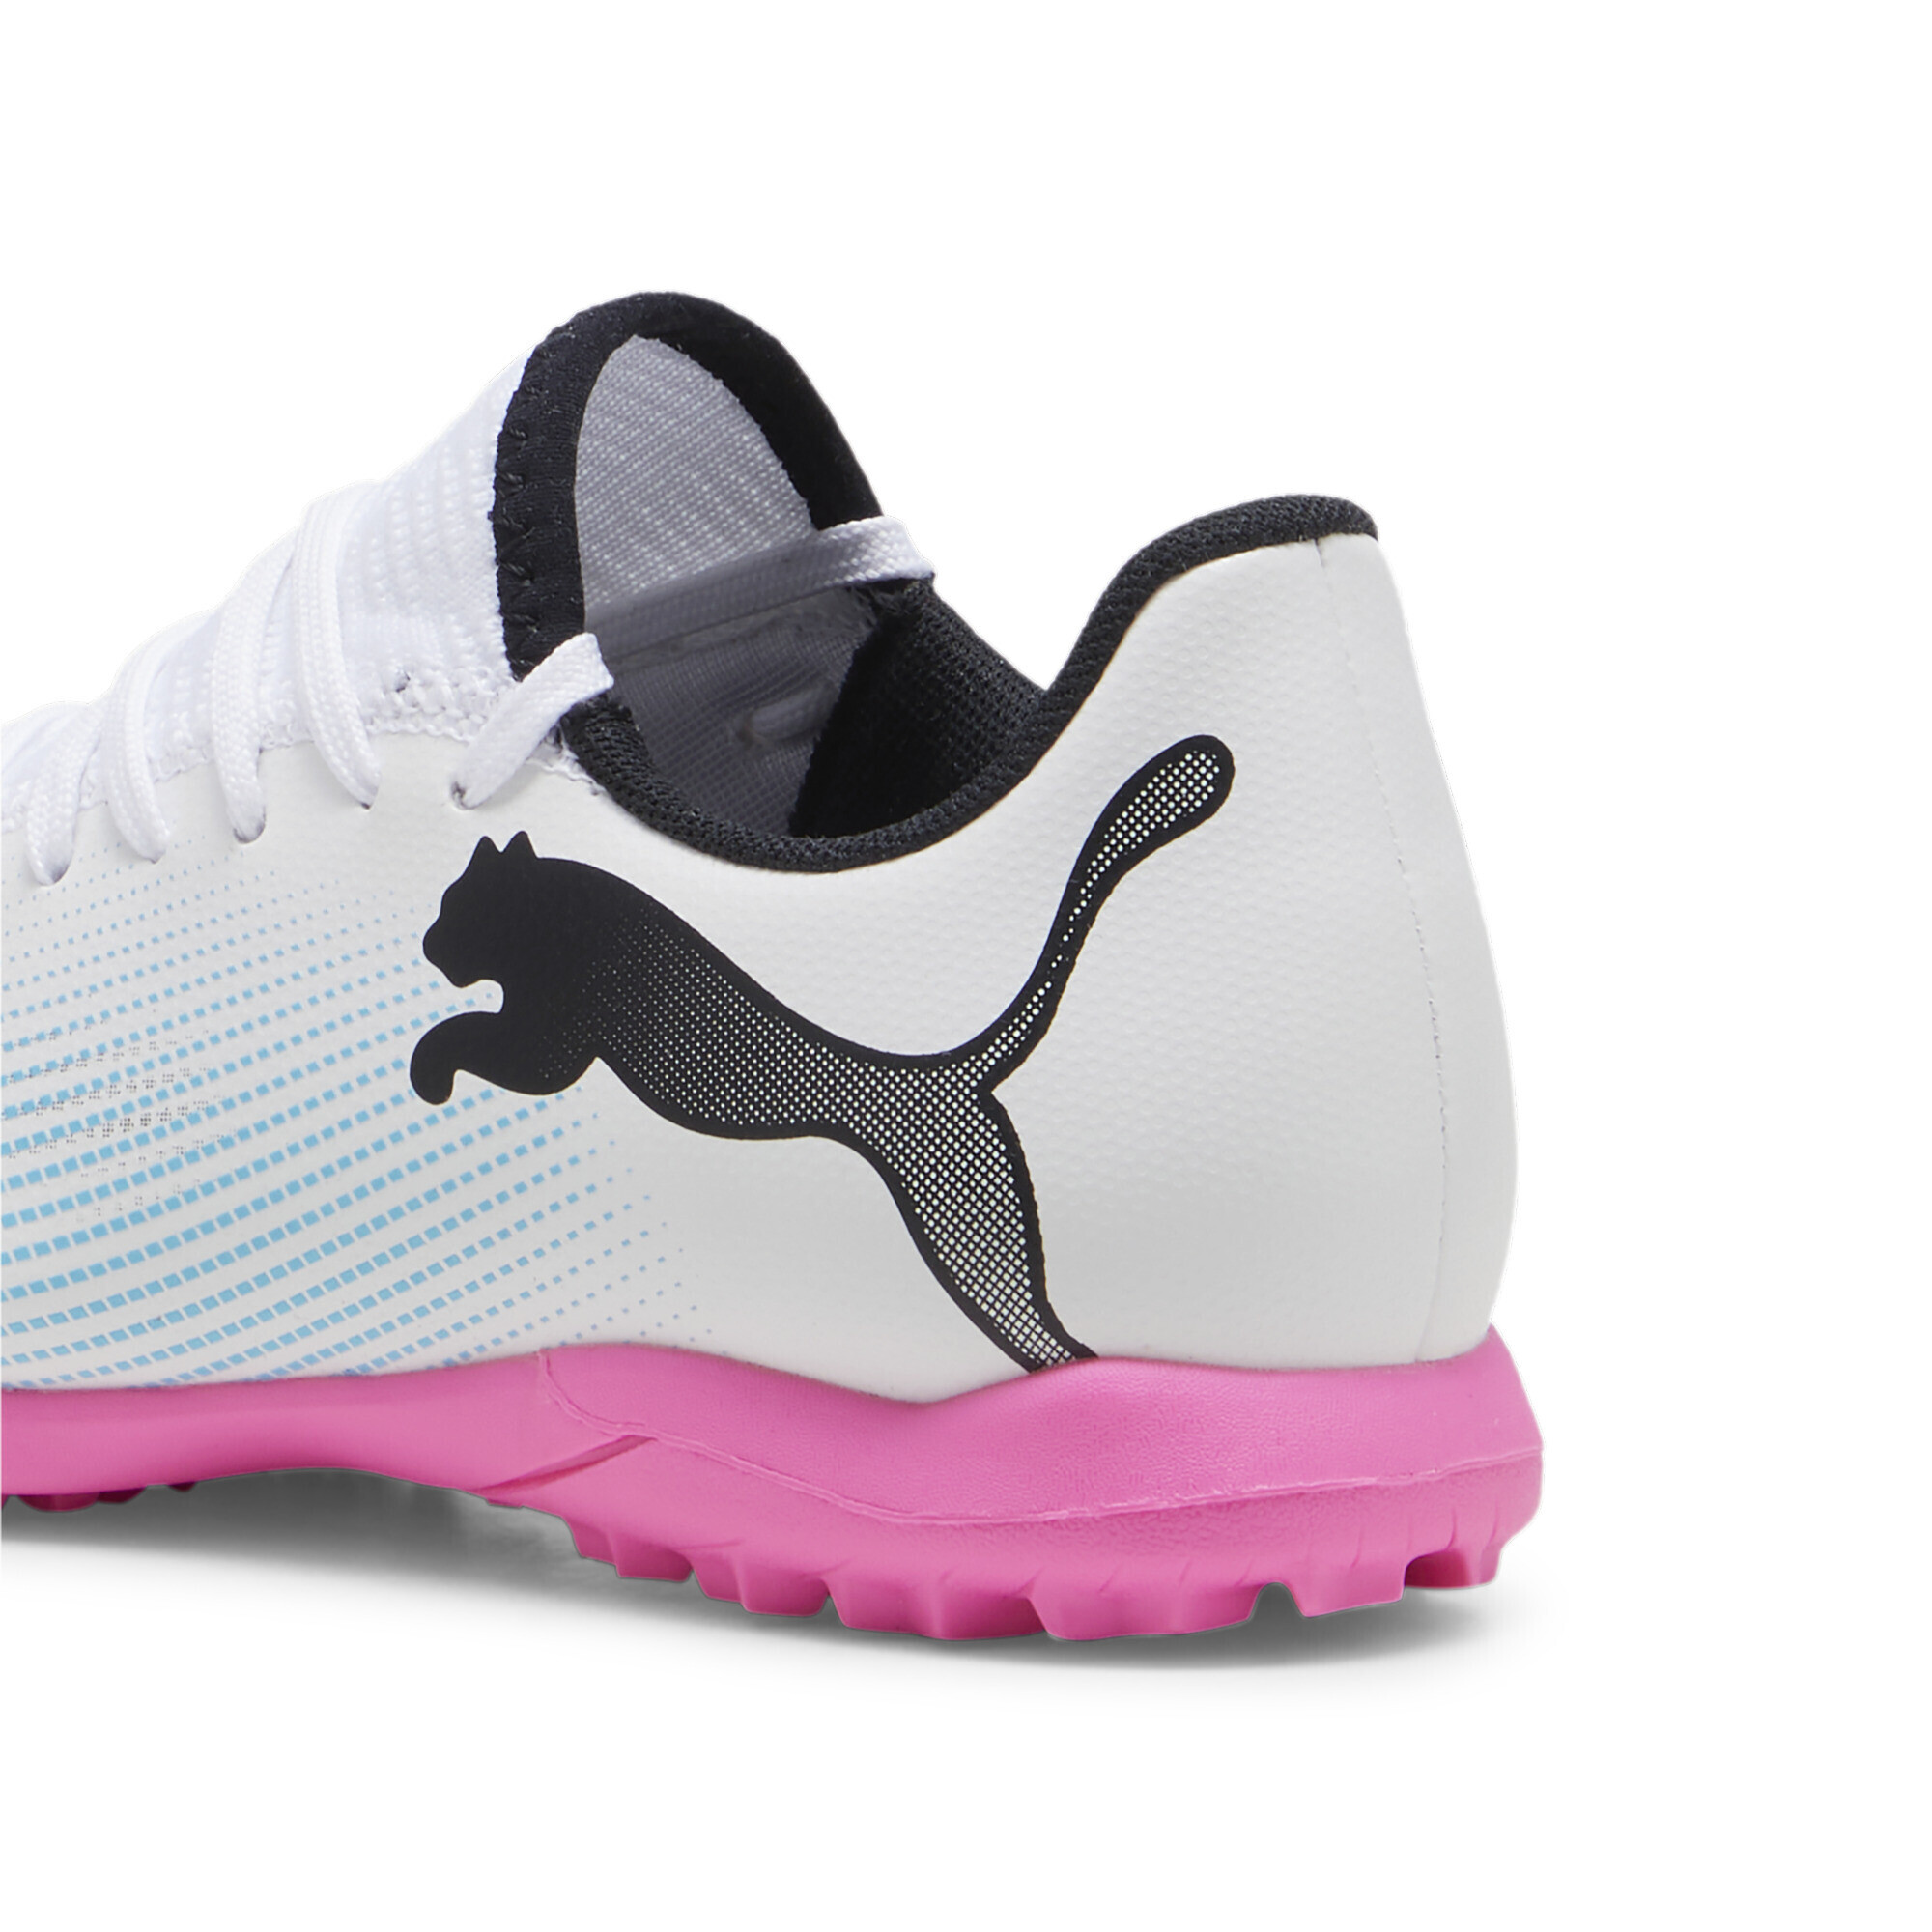 PUMA FUTURE 7 PLAY TT Youth Football Boots In White/Pink, Size EU 29